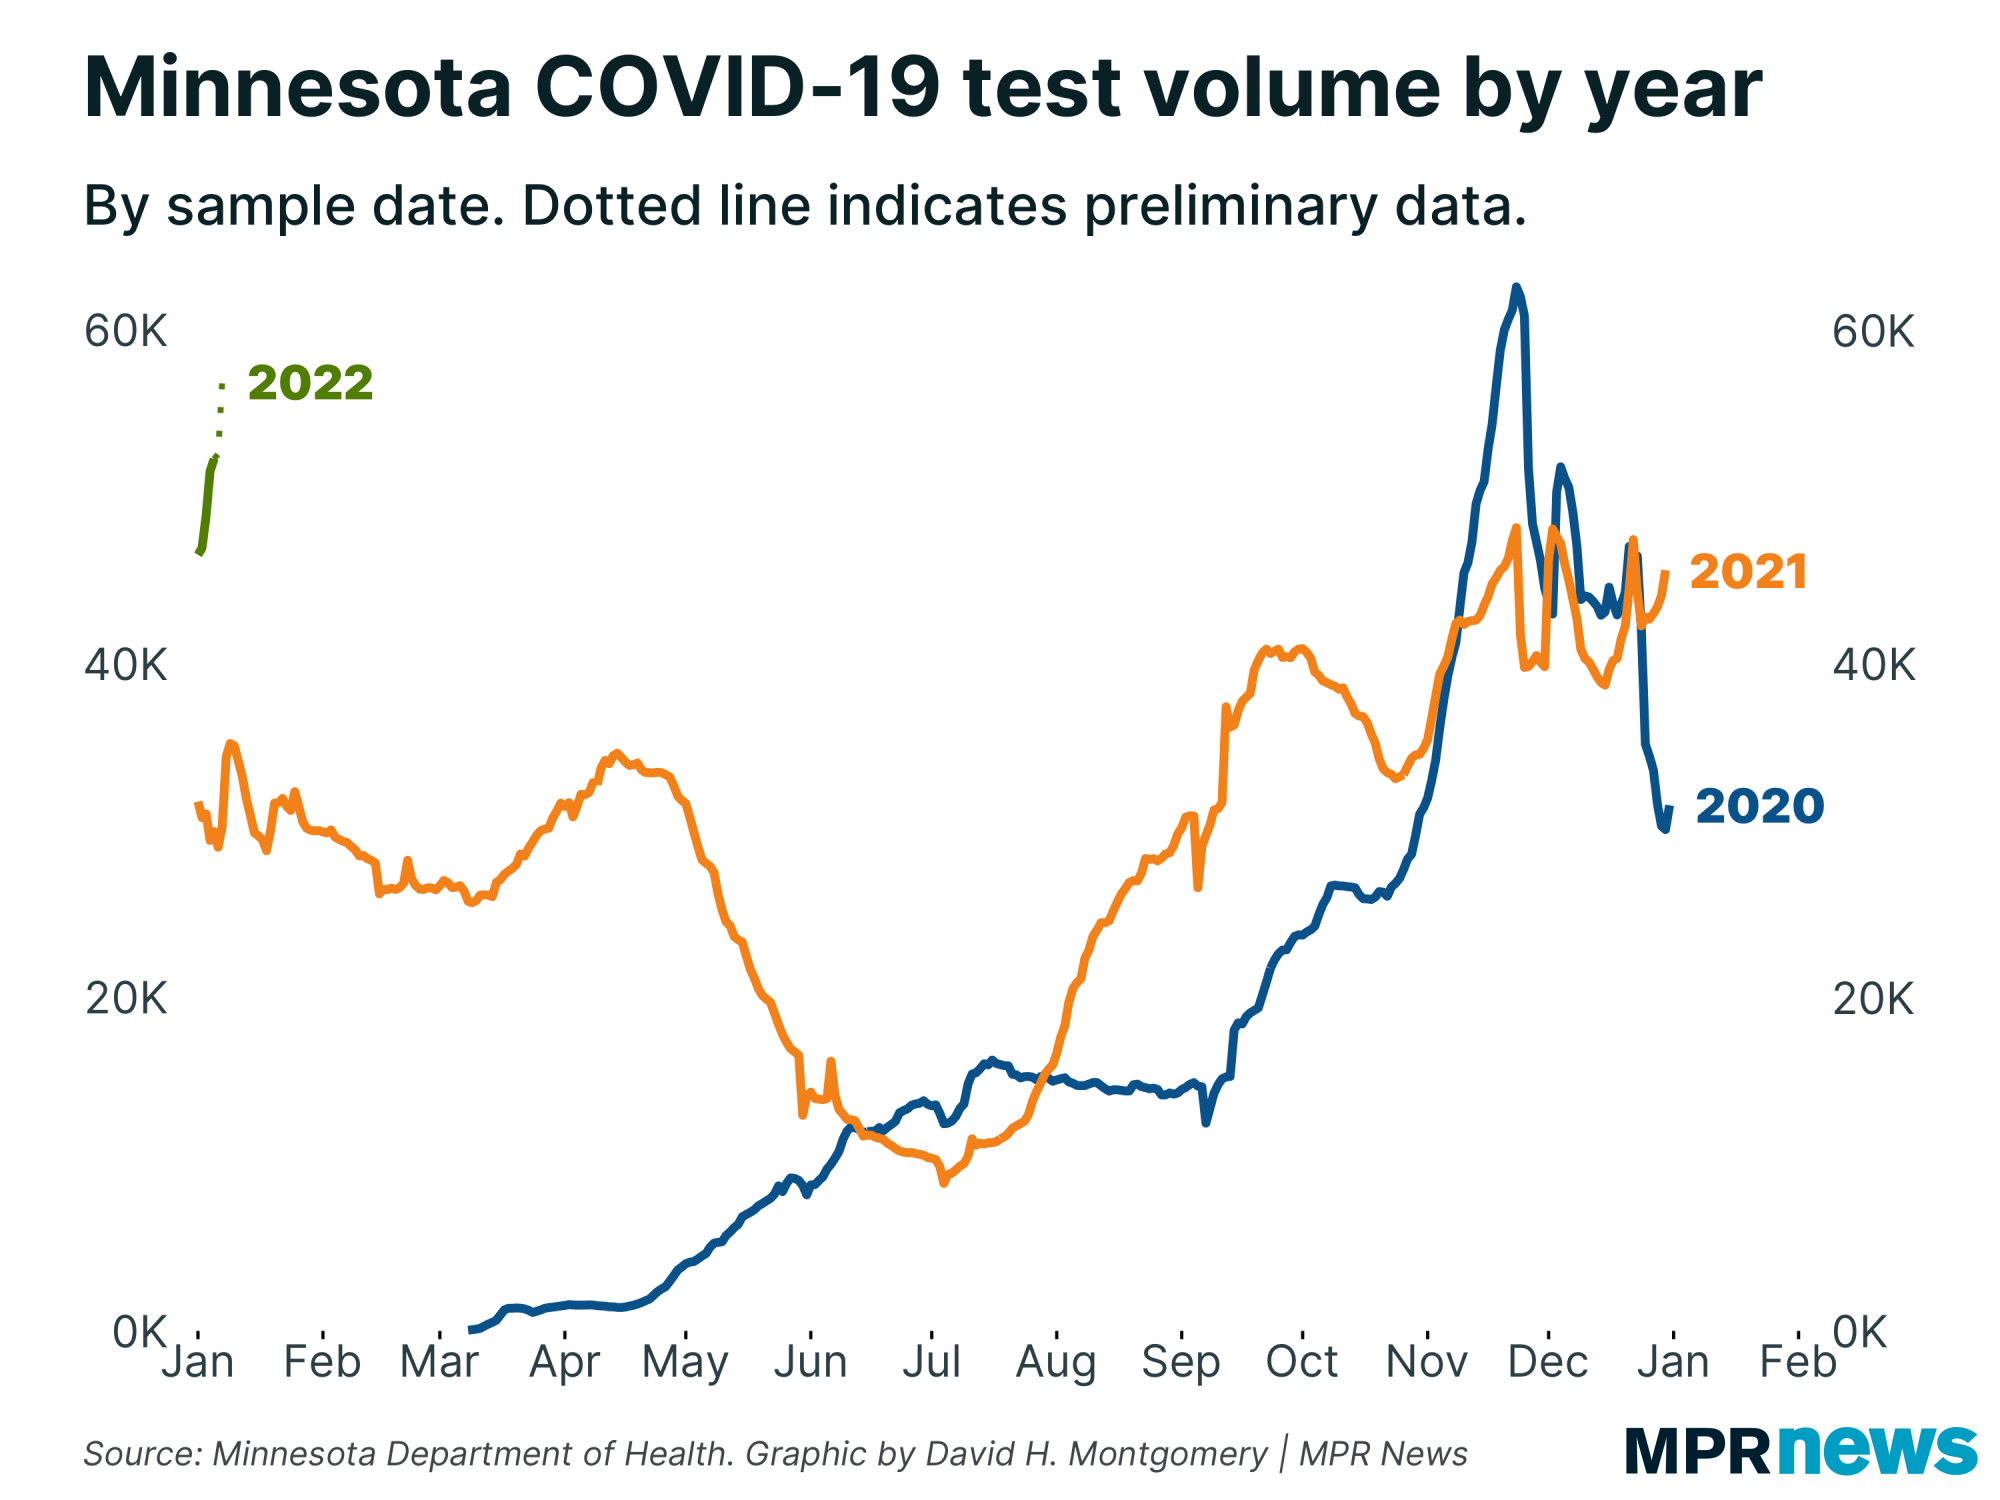 Graph of Minnesota's COVID-19 tests by year